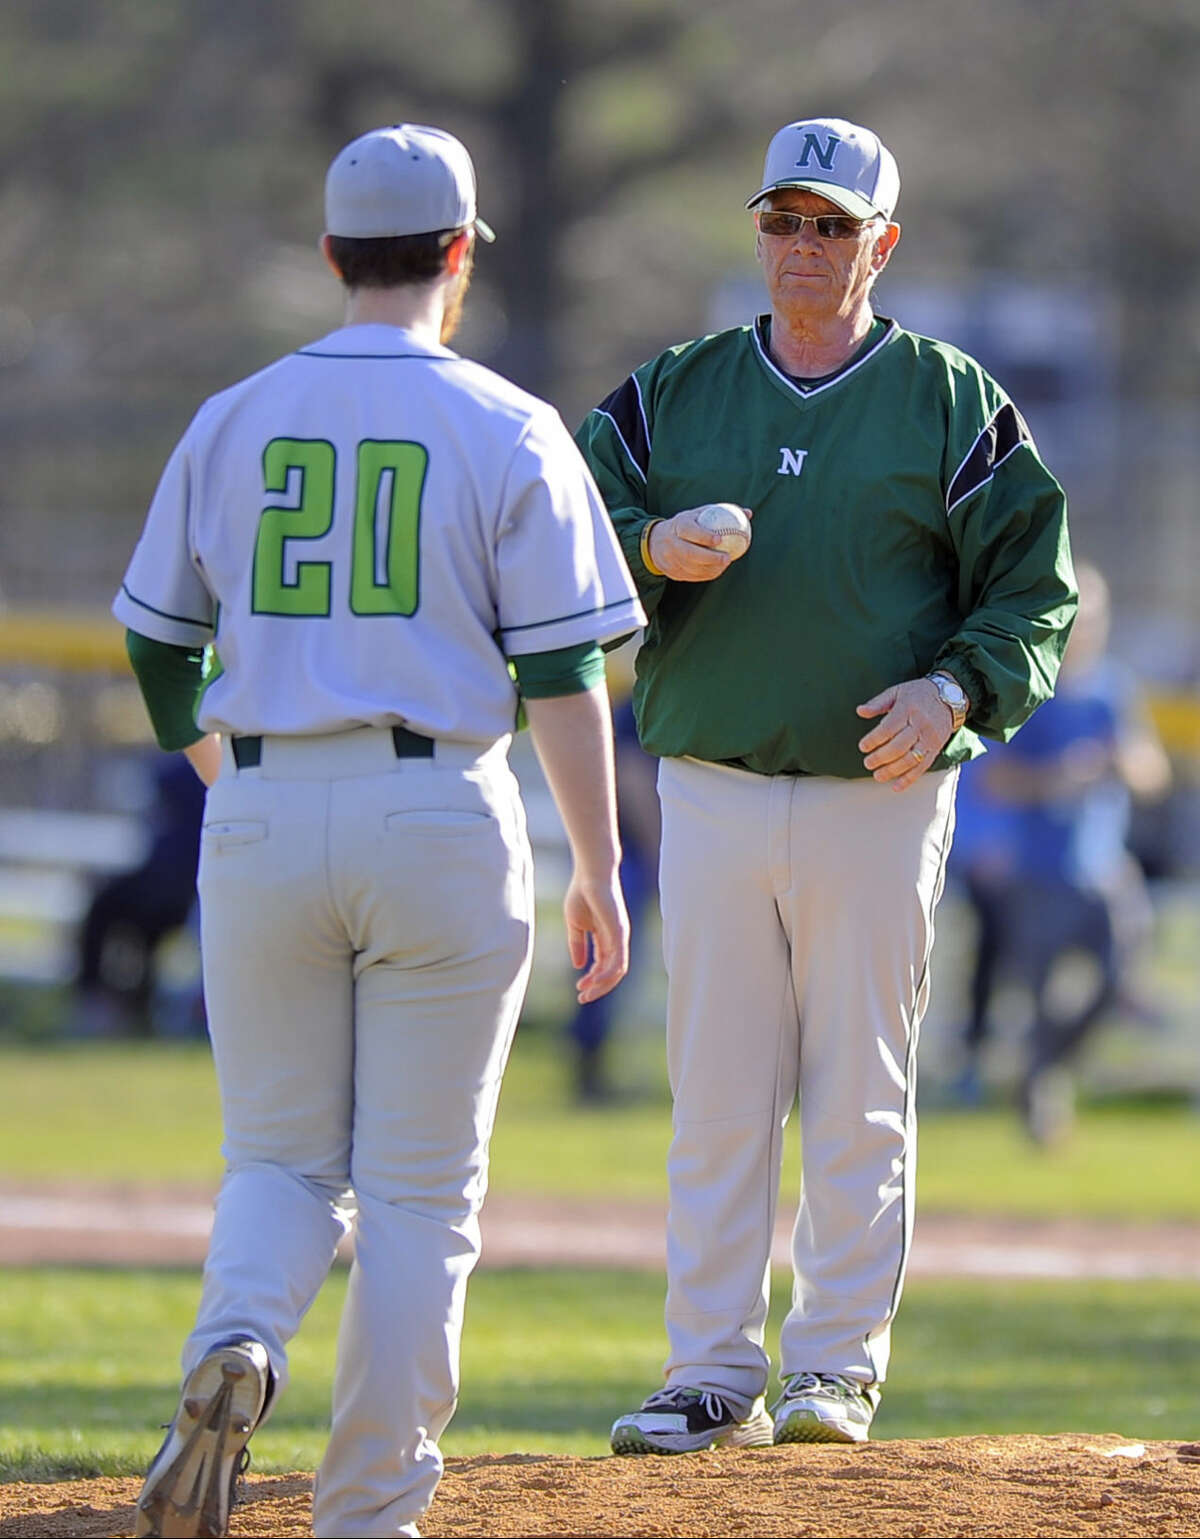 Norwalk coach Pete Tucci hands off the pitching against Stamford to Kyle Pisacrita after pulling starting pitcher Isaac Keehn in the fourth inning of a FCIAC boys baseball game at Stamford High School on April 15, 2016. Norwalk defeated Stamford 8-7.